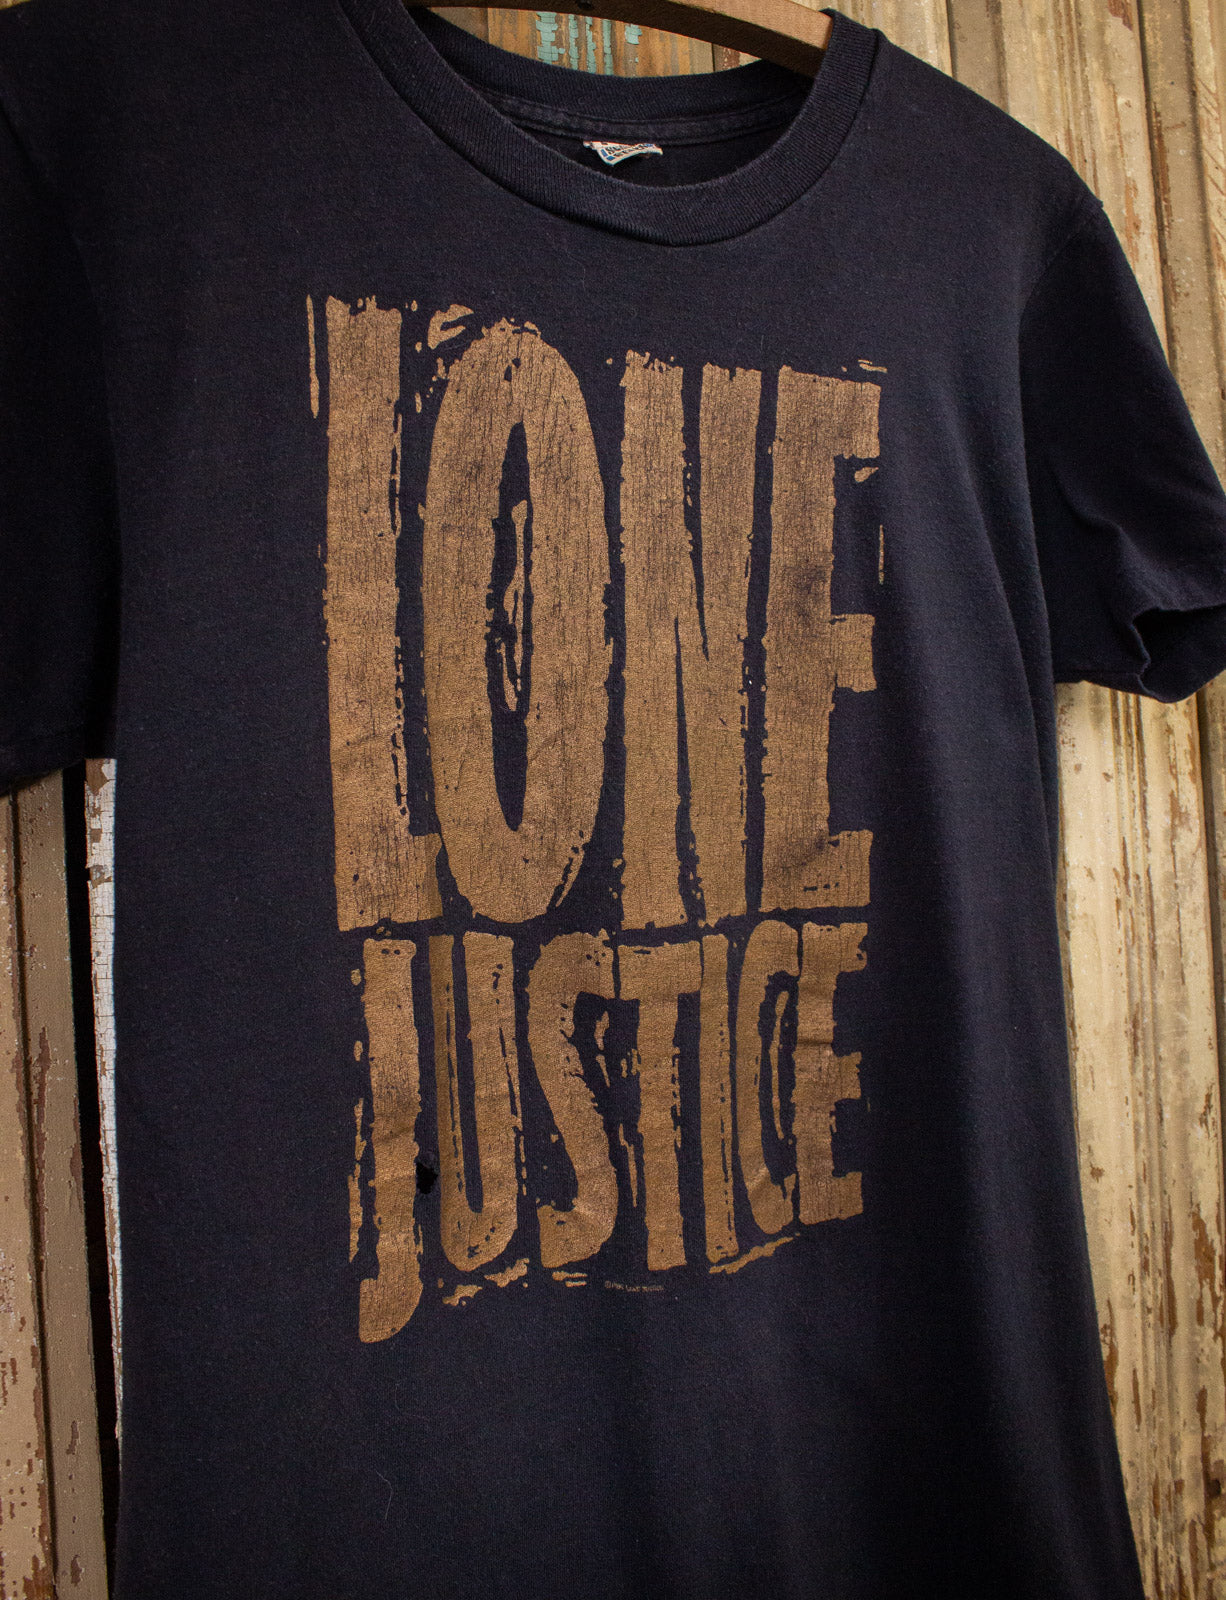 Vintage Lone Justice Concert T Shirt 1985 Black Small